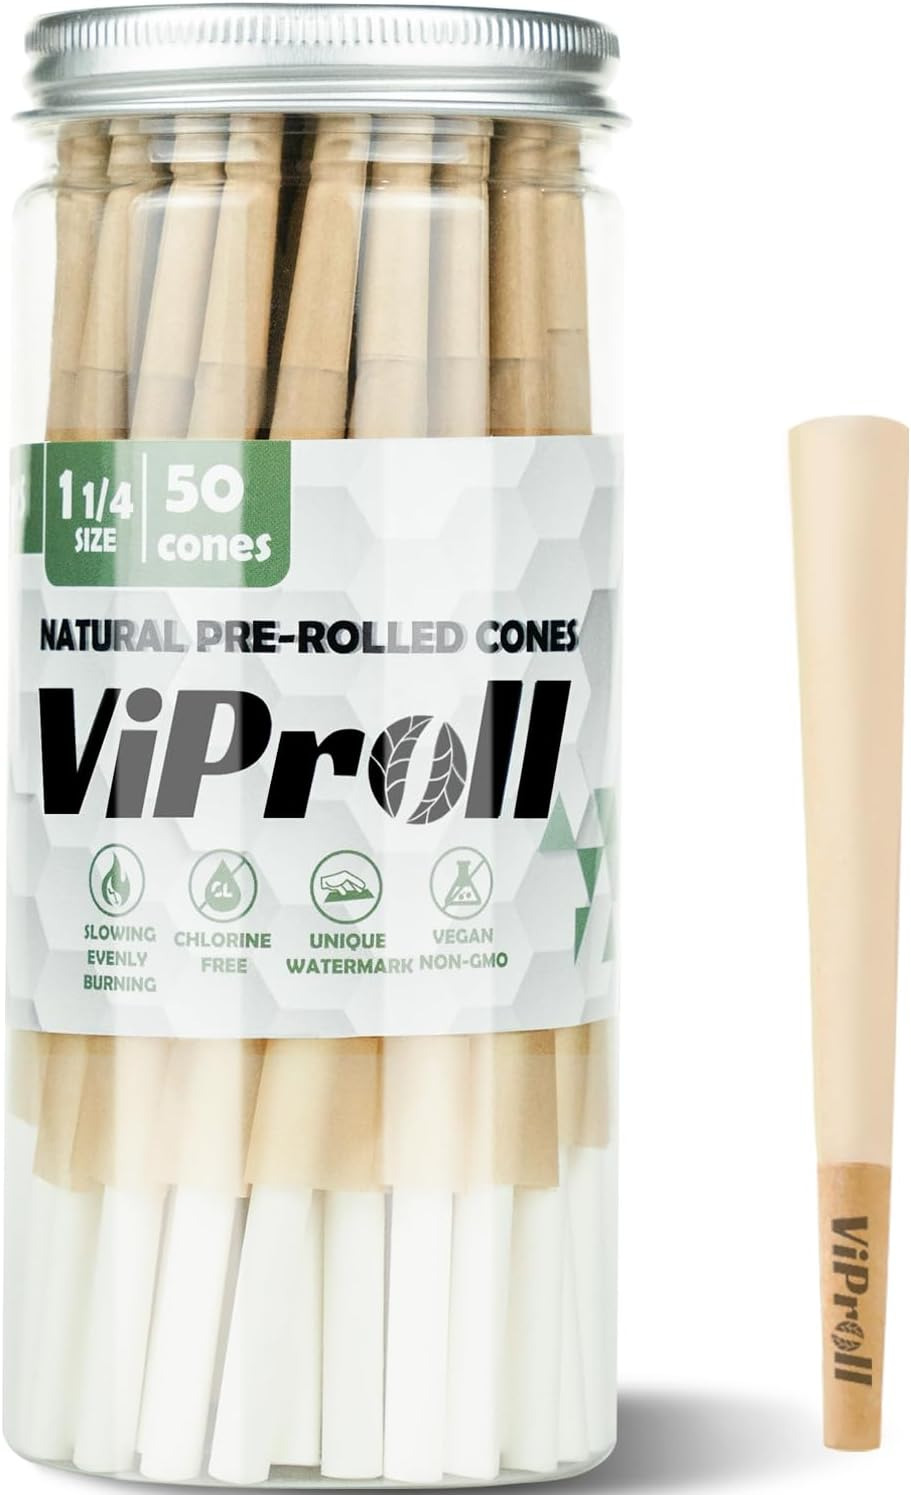 Pre Rolled Cones 1 1/4 Size 50 Pack, Natural Unbleached Cones Rolling Papers